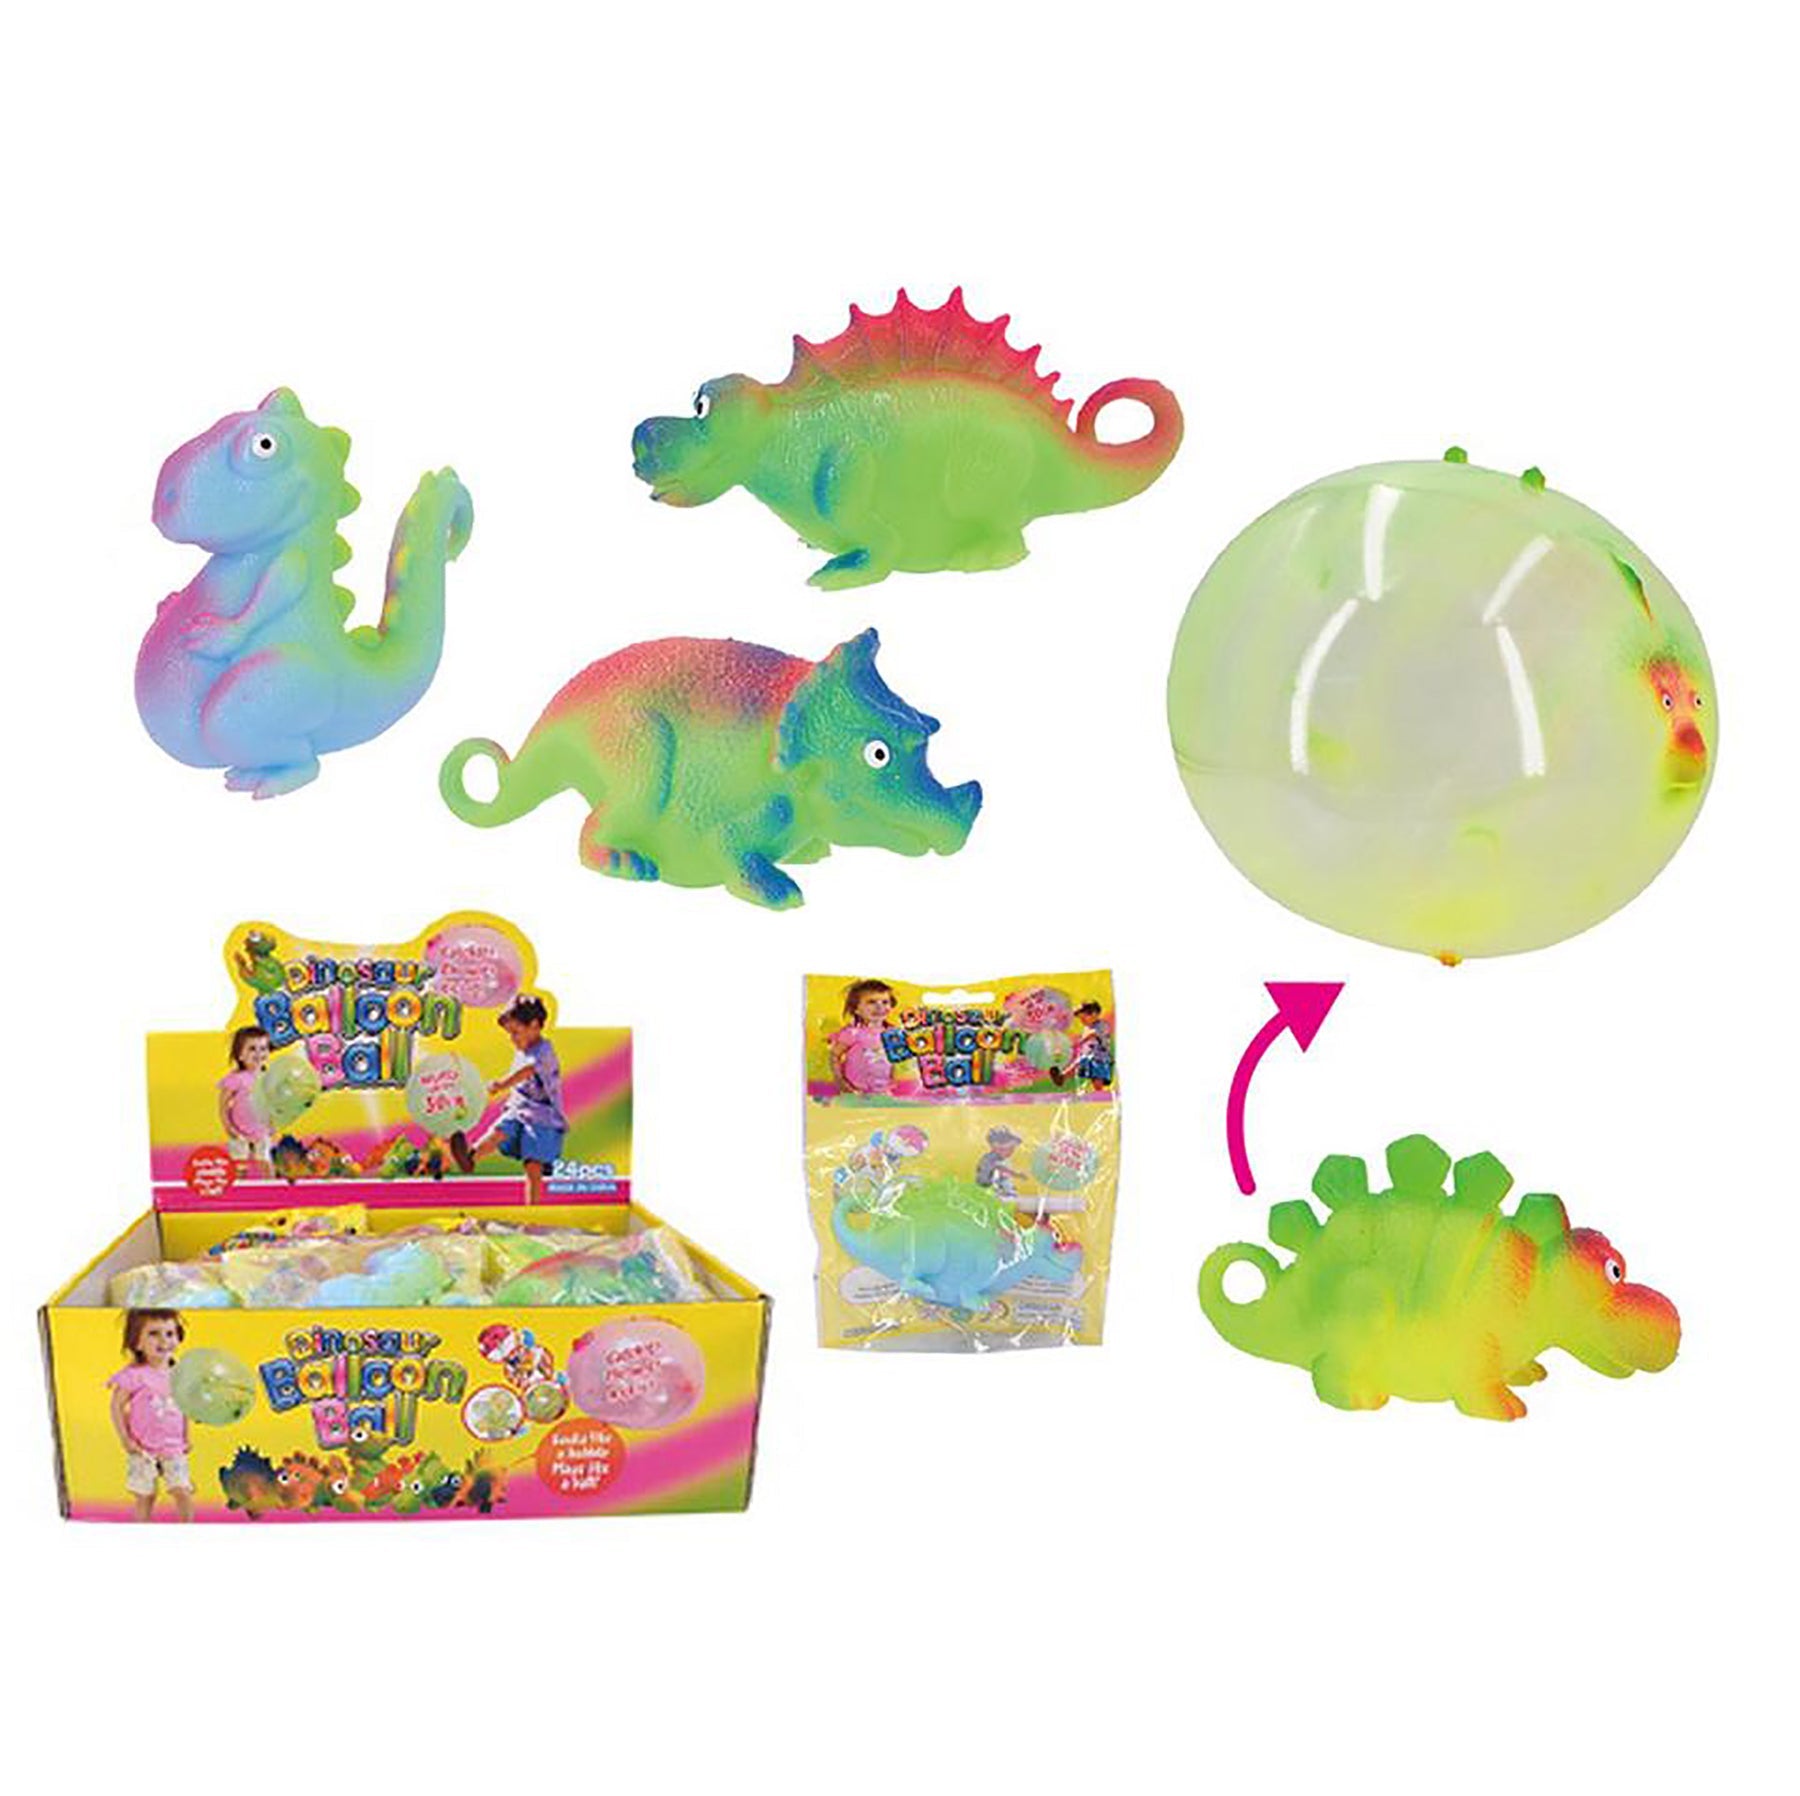 Squeezy Dinosaur Ball Inflates Up to 12in